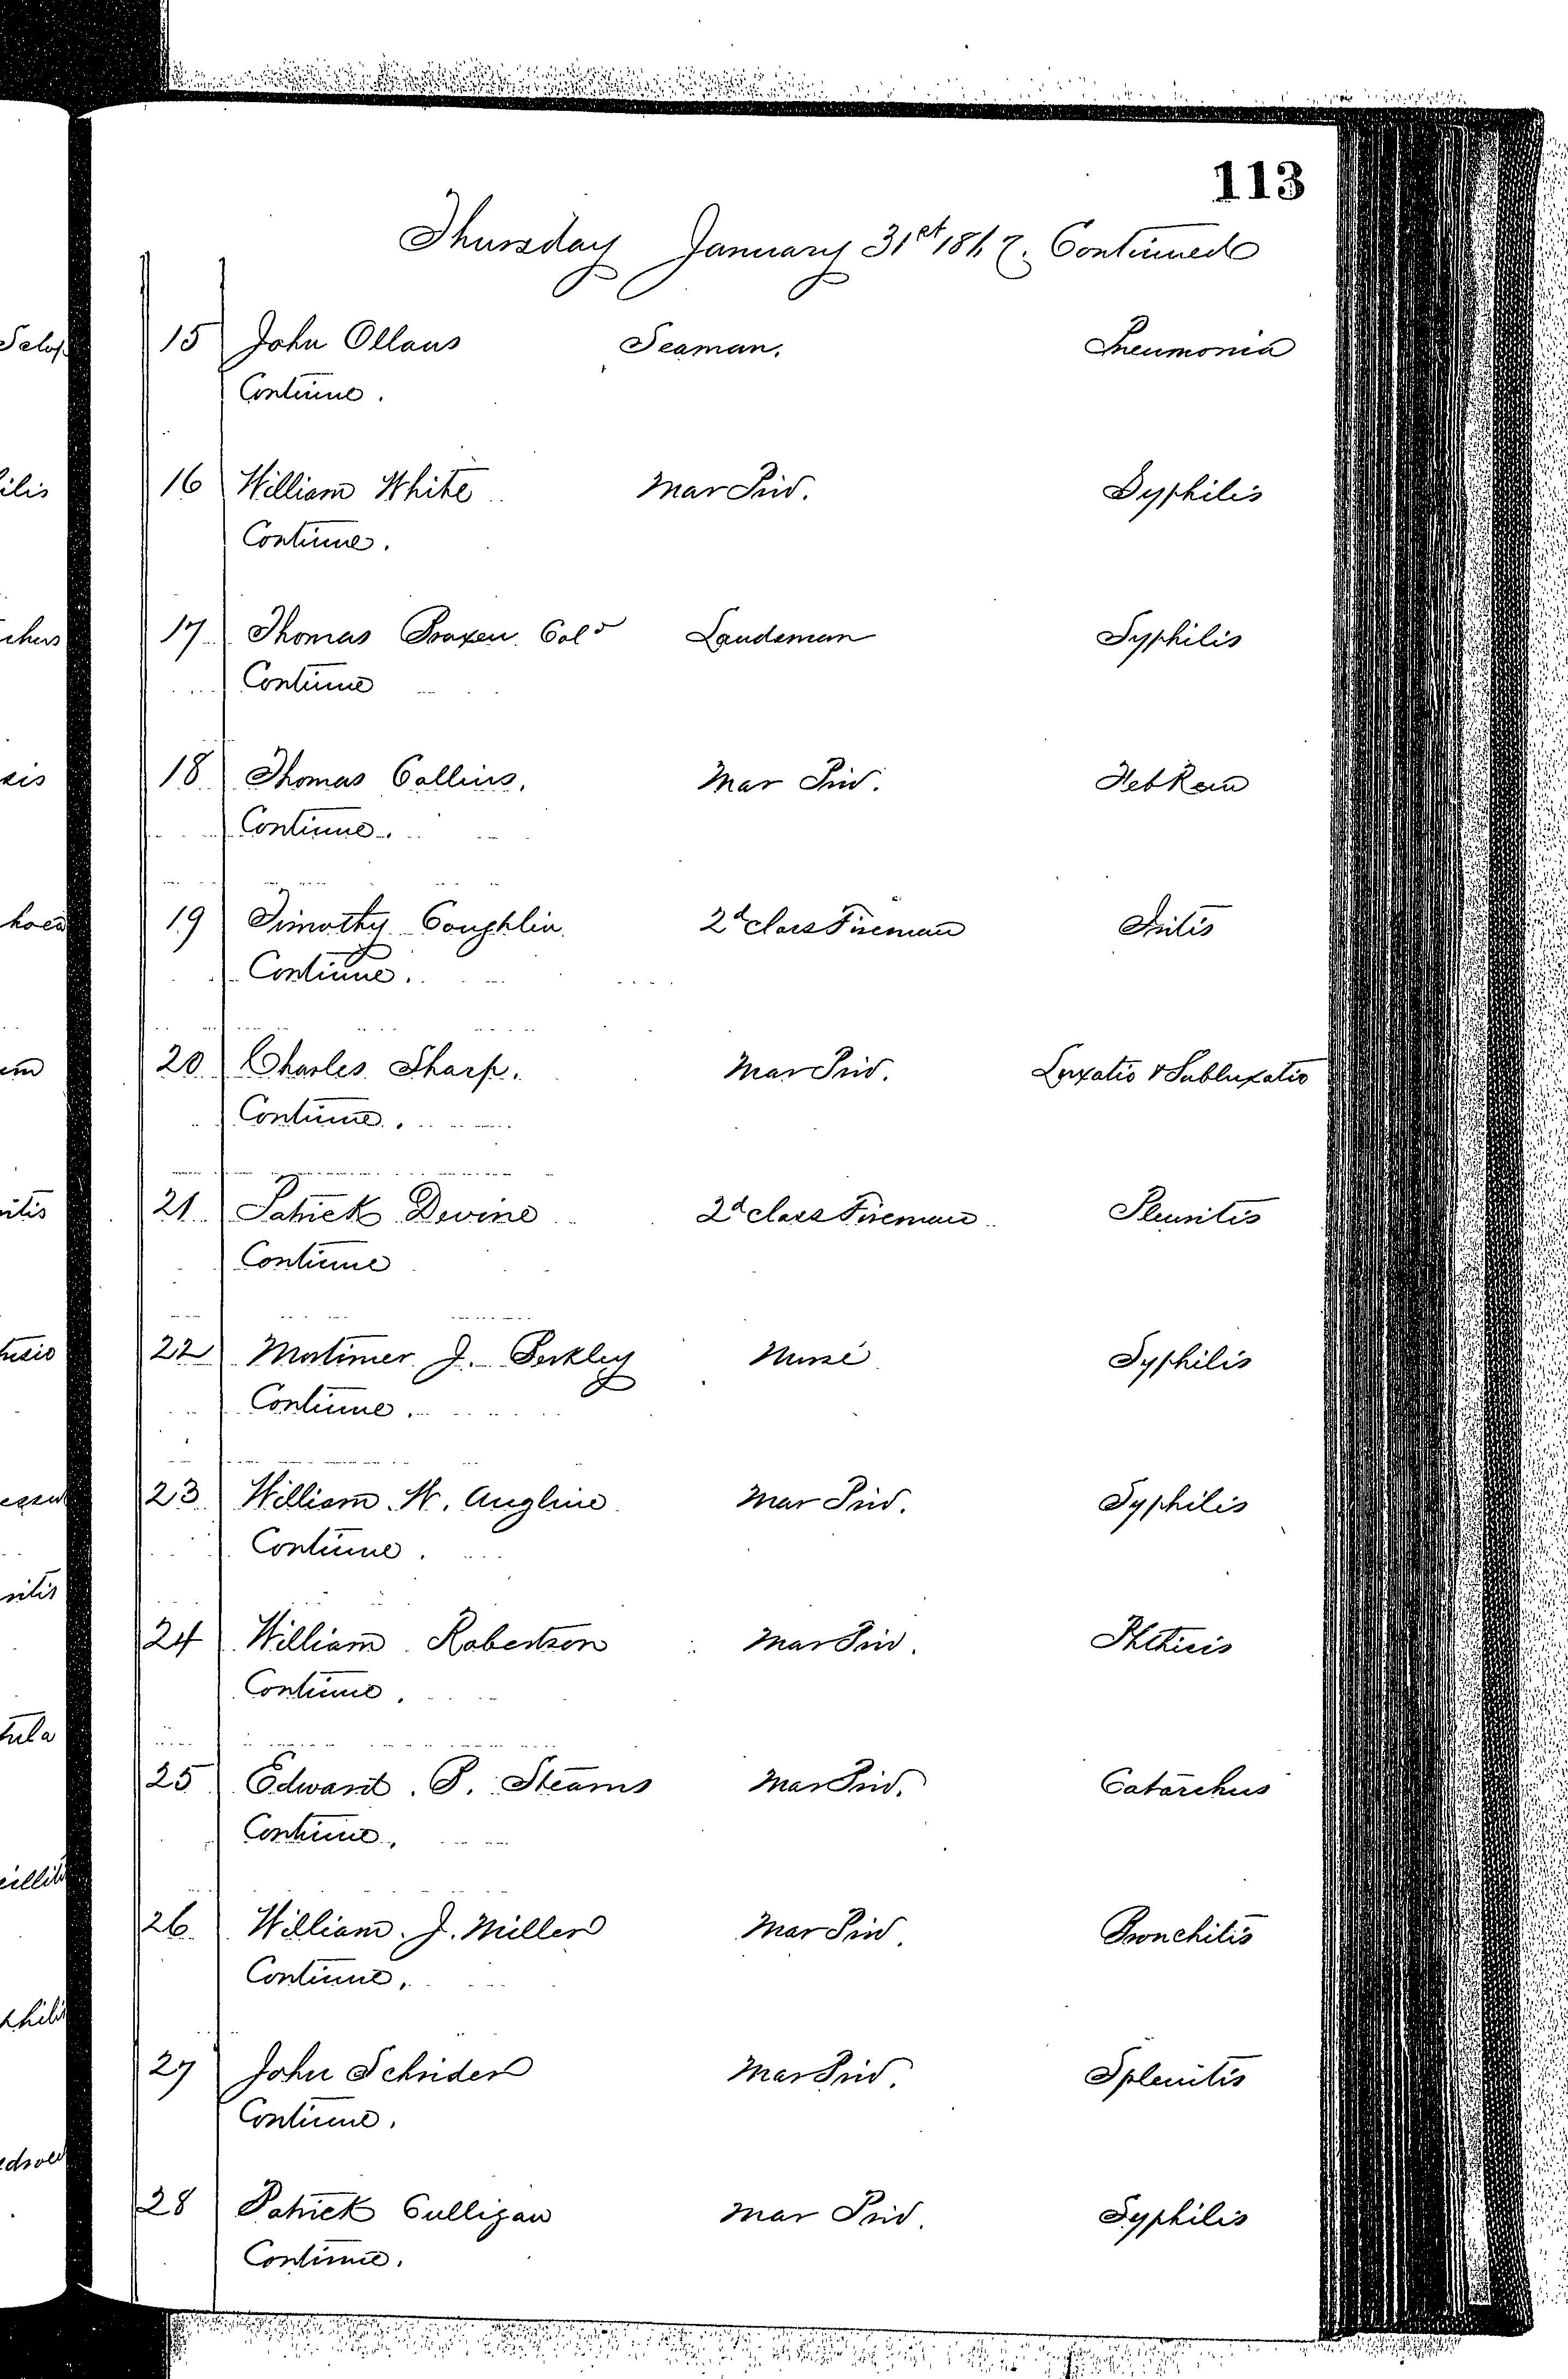 Patients in the Naval Hospital, Washington DC, on January 31, 1867 - Page 2 of 3, in the Medical Journal, October 1, 1866 to March 20, 1867